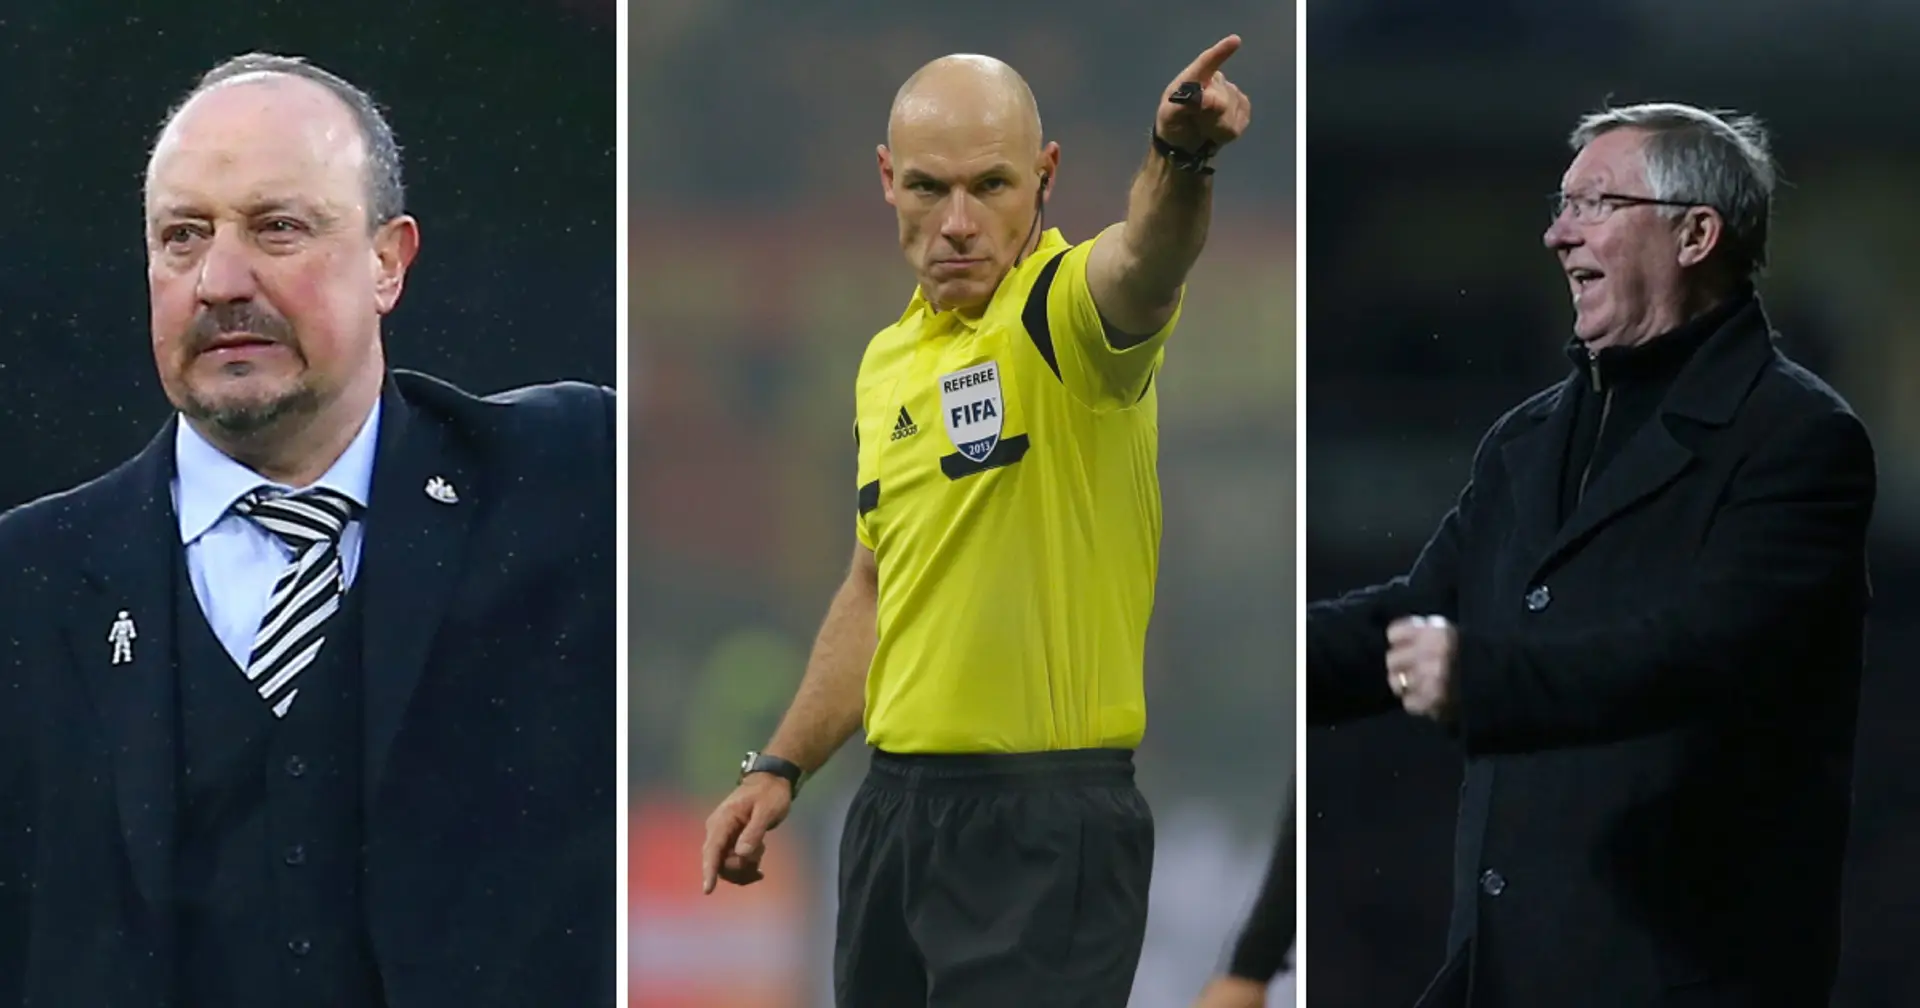 'I wish I could change it, I got the decision wrong': Howard Webb regrets Man Utd decision which impacted Liverpool's title aspirations in 2009